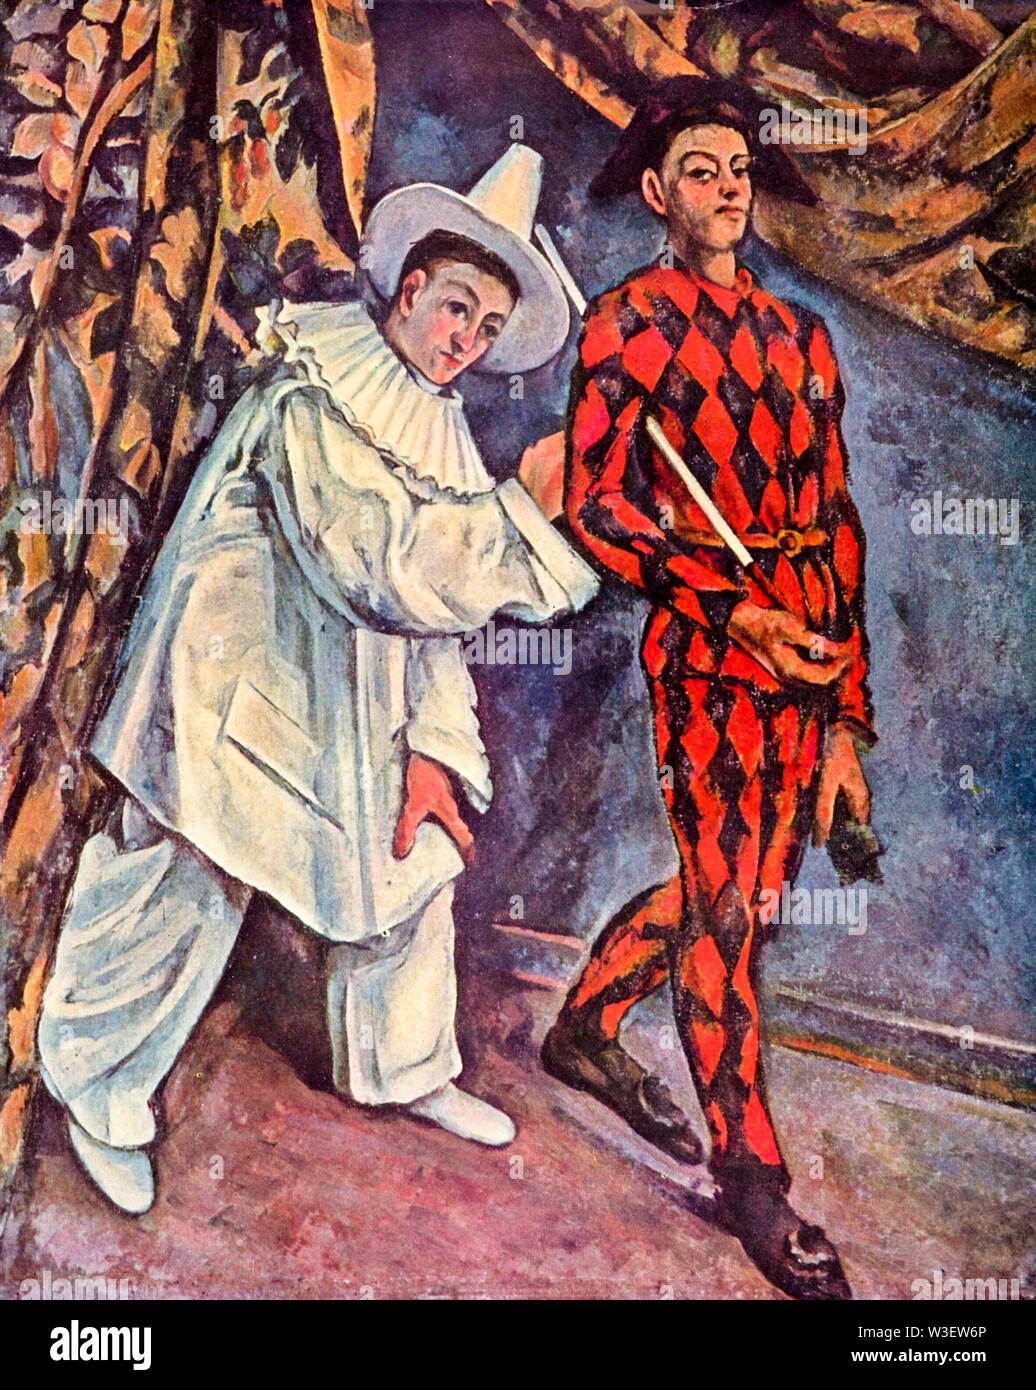 Paul Cézanne, Shrove Tuesday, Pierot and Harlequin, painting, 1888 Stock Photo